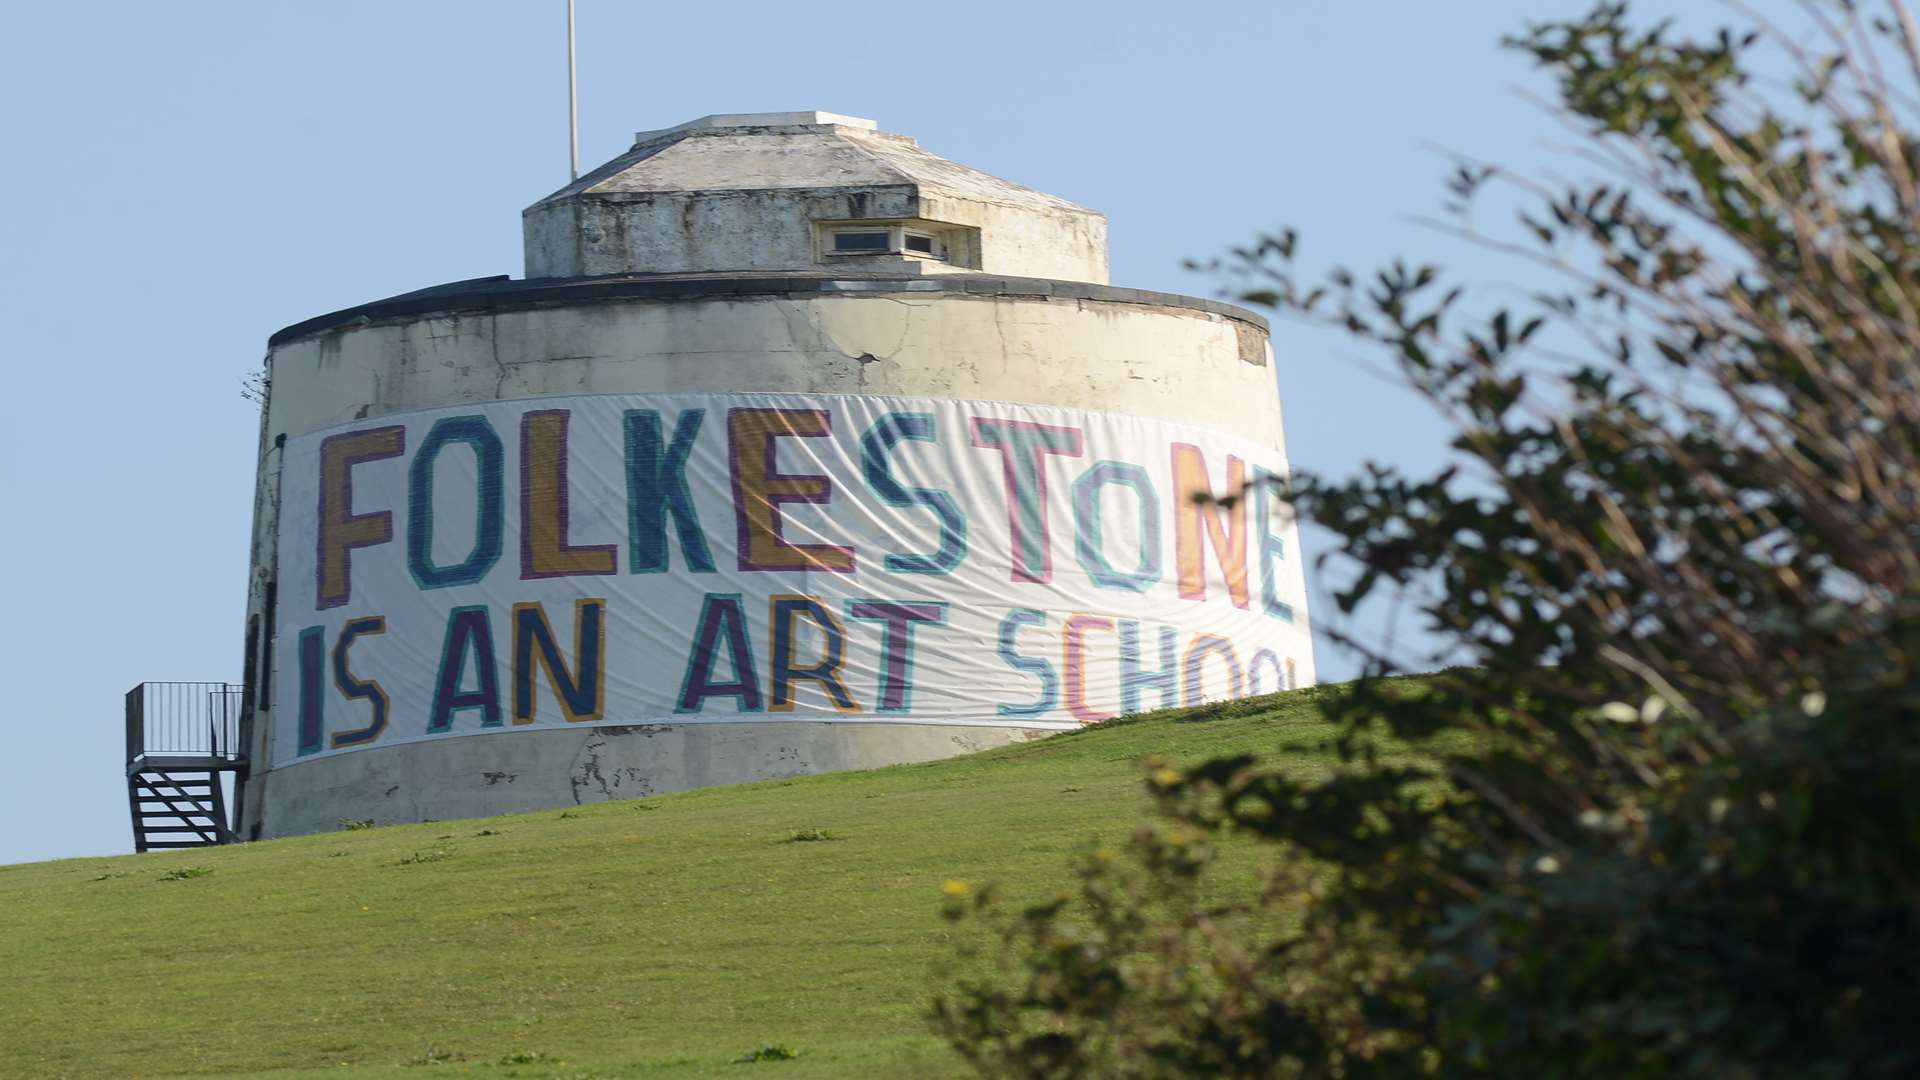 Folkestone Is An Art School by Kent-based Bob and Roberta Smith Picture: Gary Browne